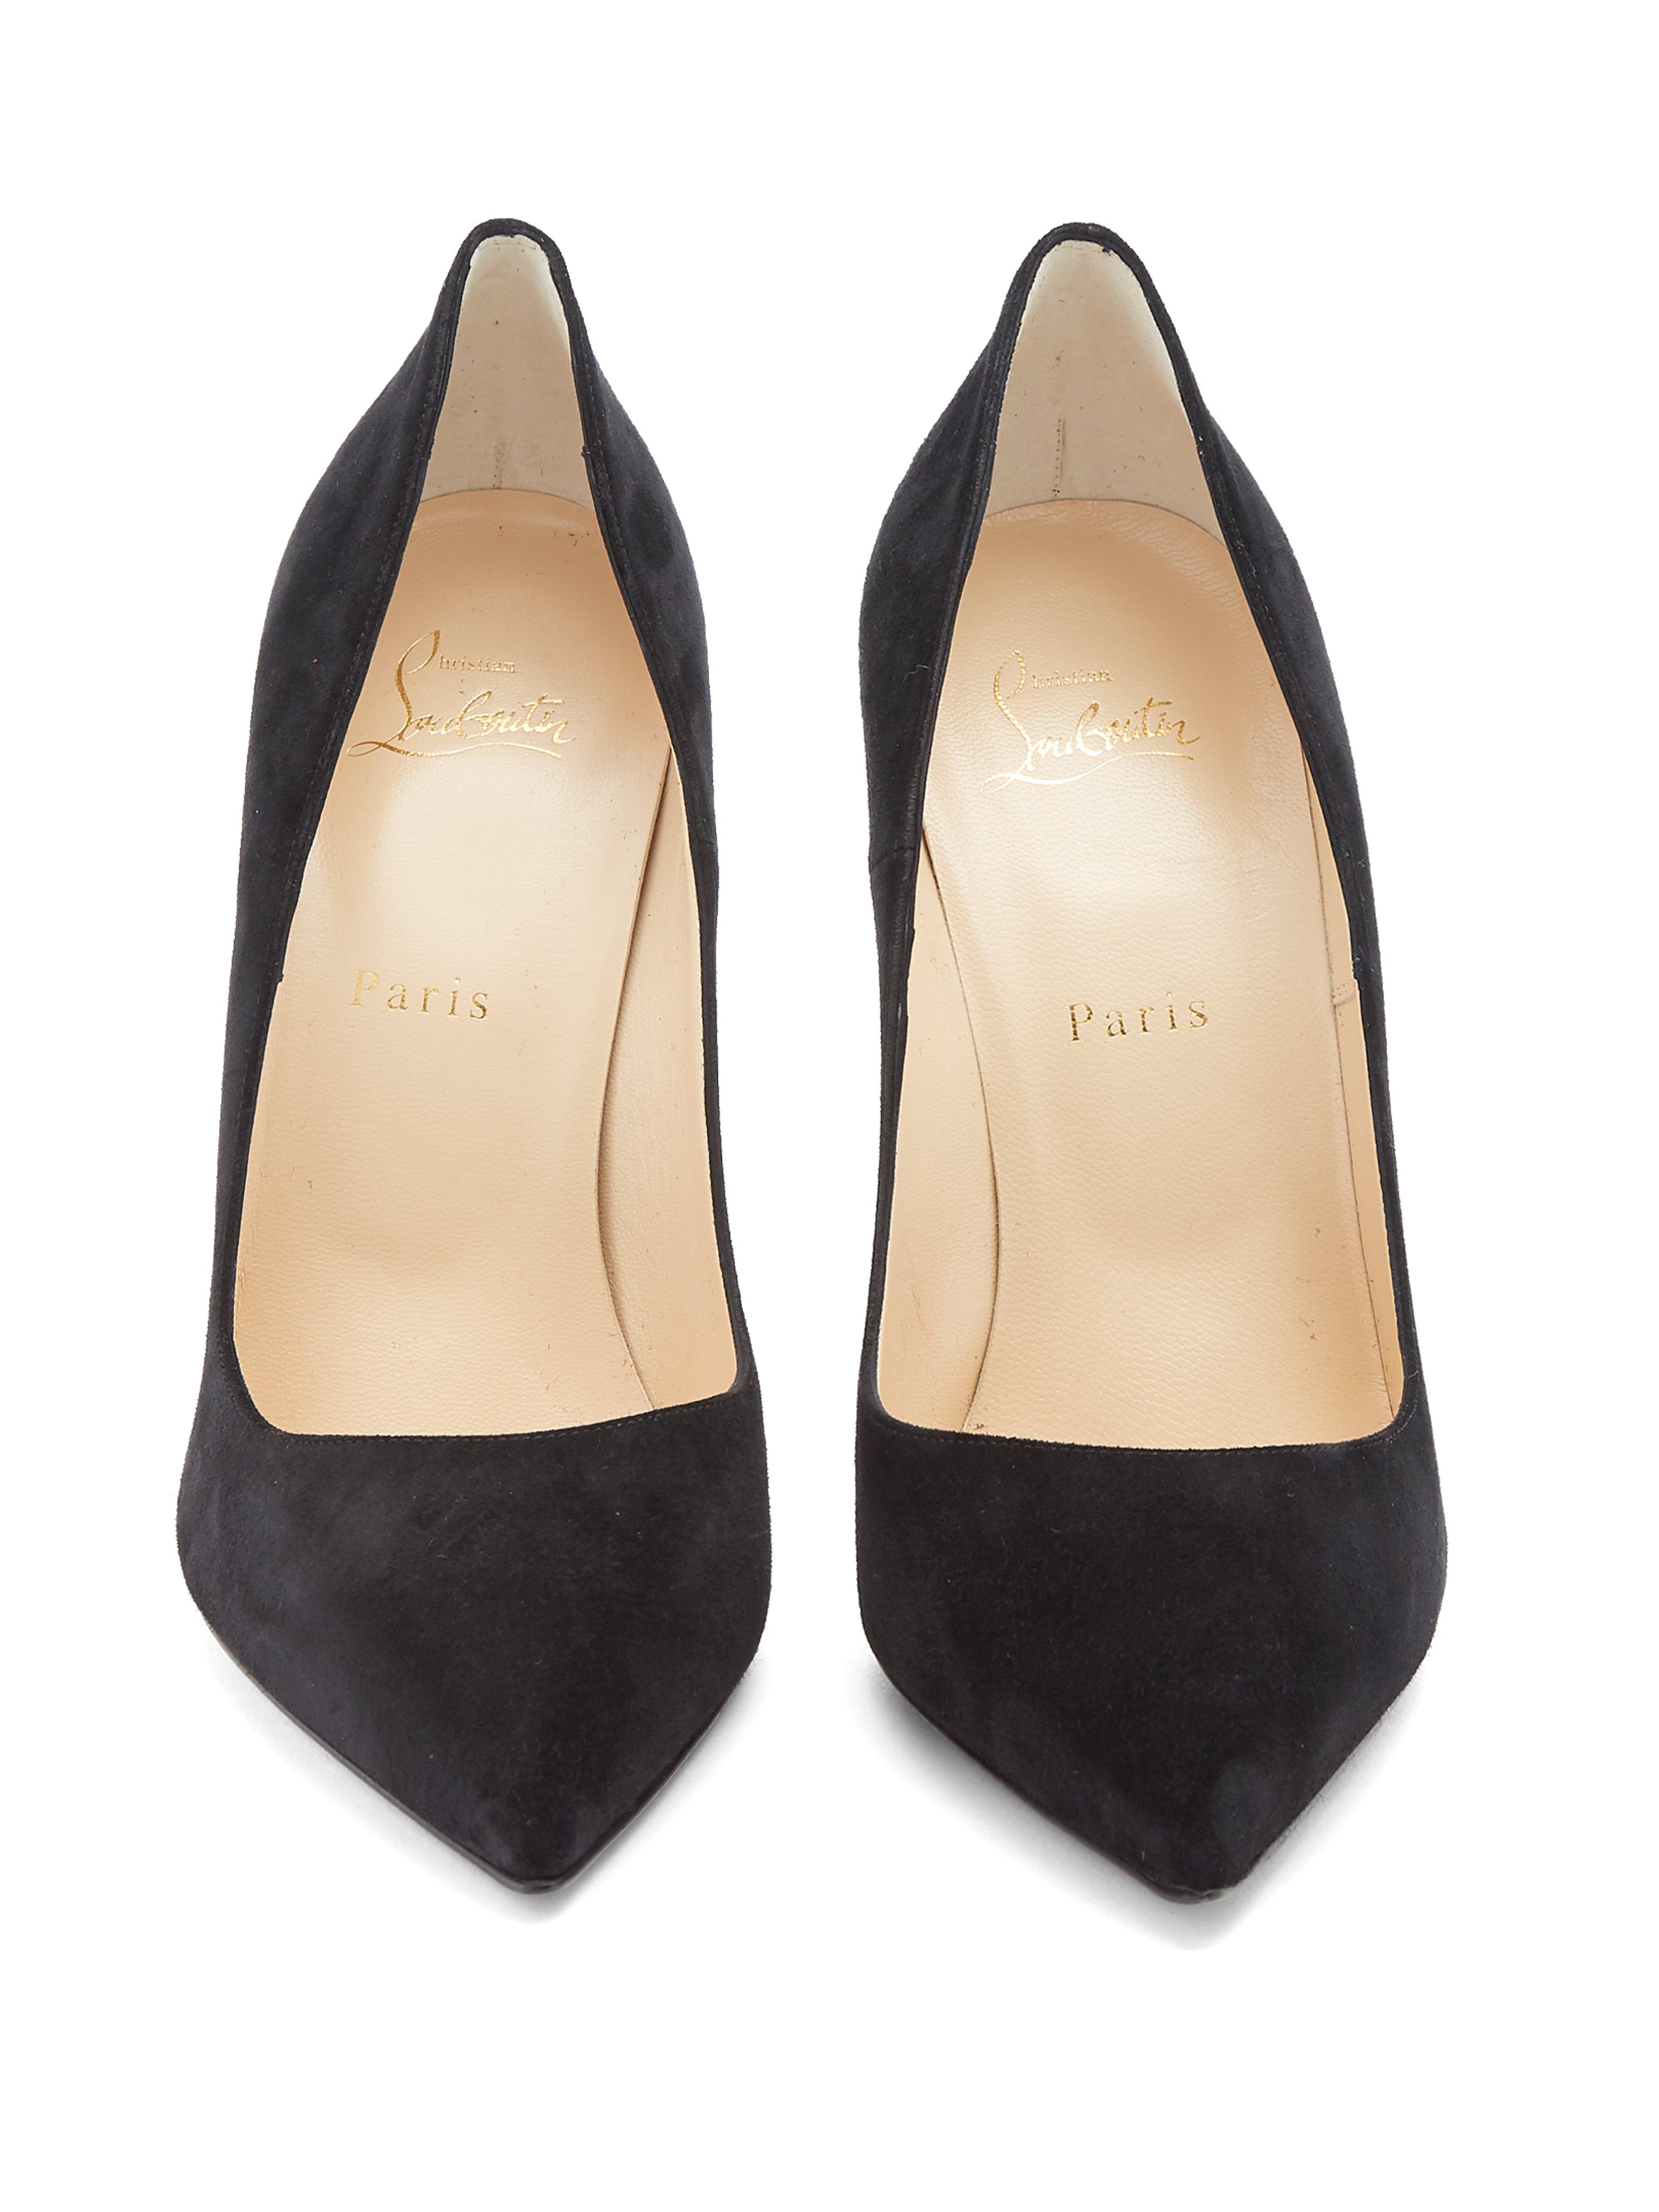 Christian Louboutin Black - So Kate 120mm Suede Pumps - Lyst